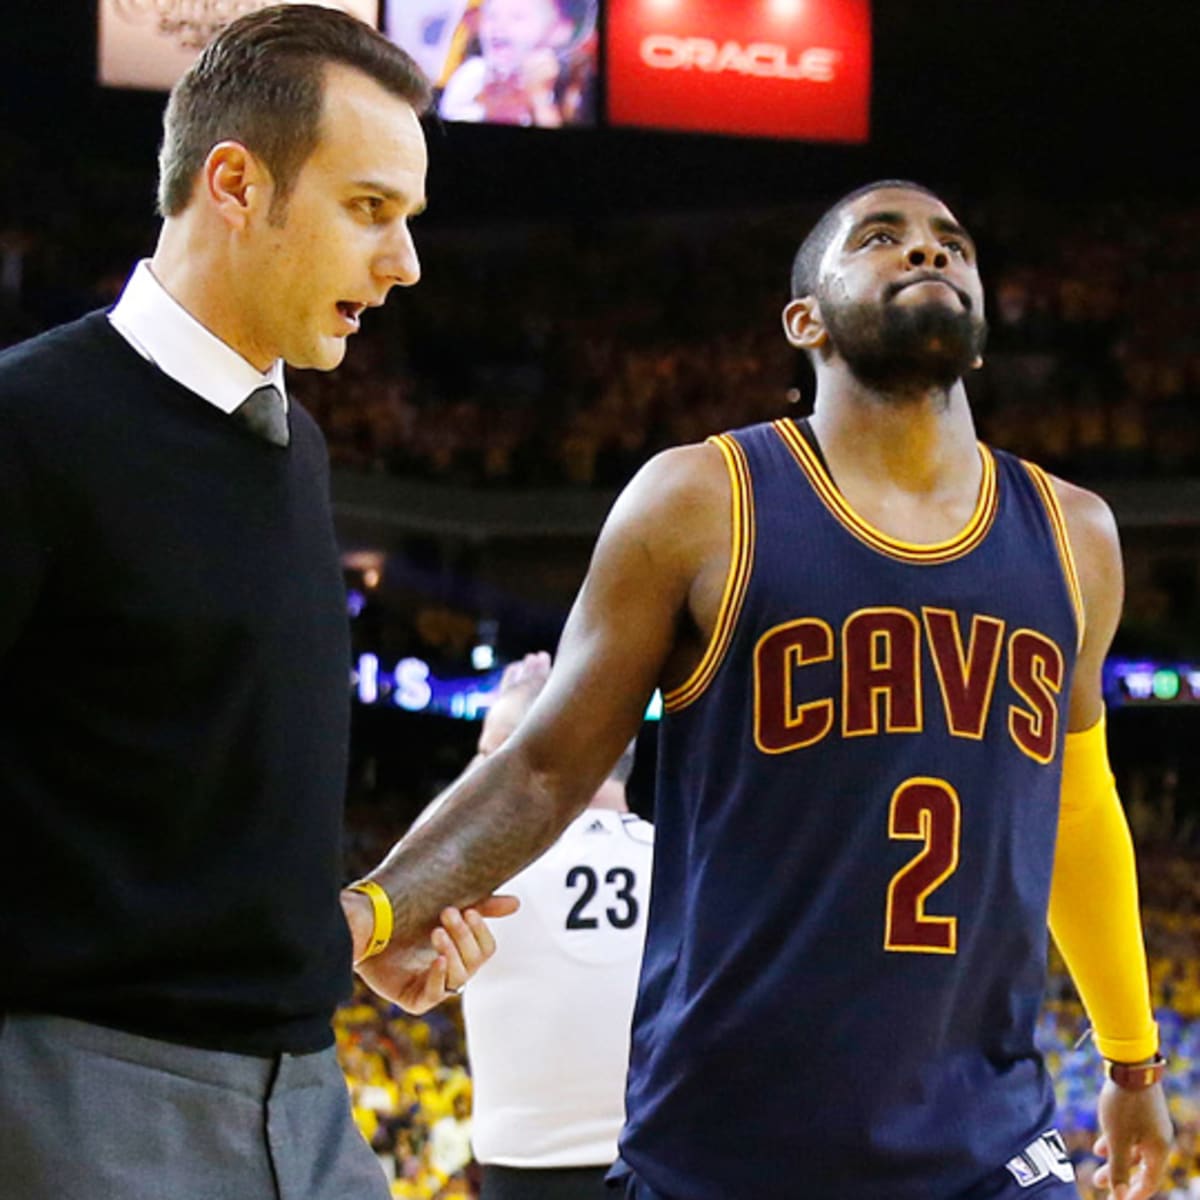 Cavs' Kyrie Irving out for NBA Finals after knee injury